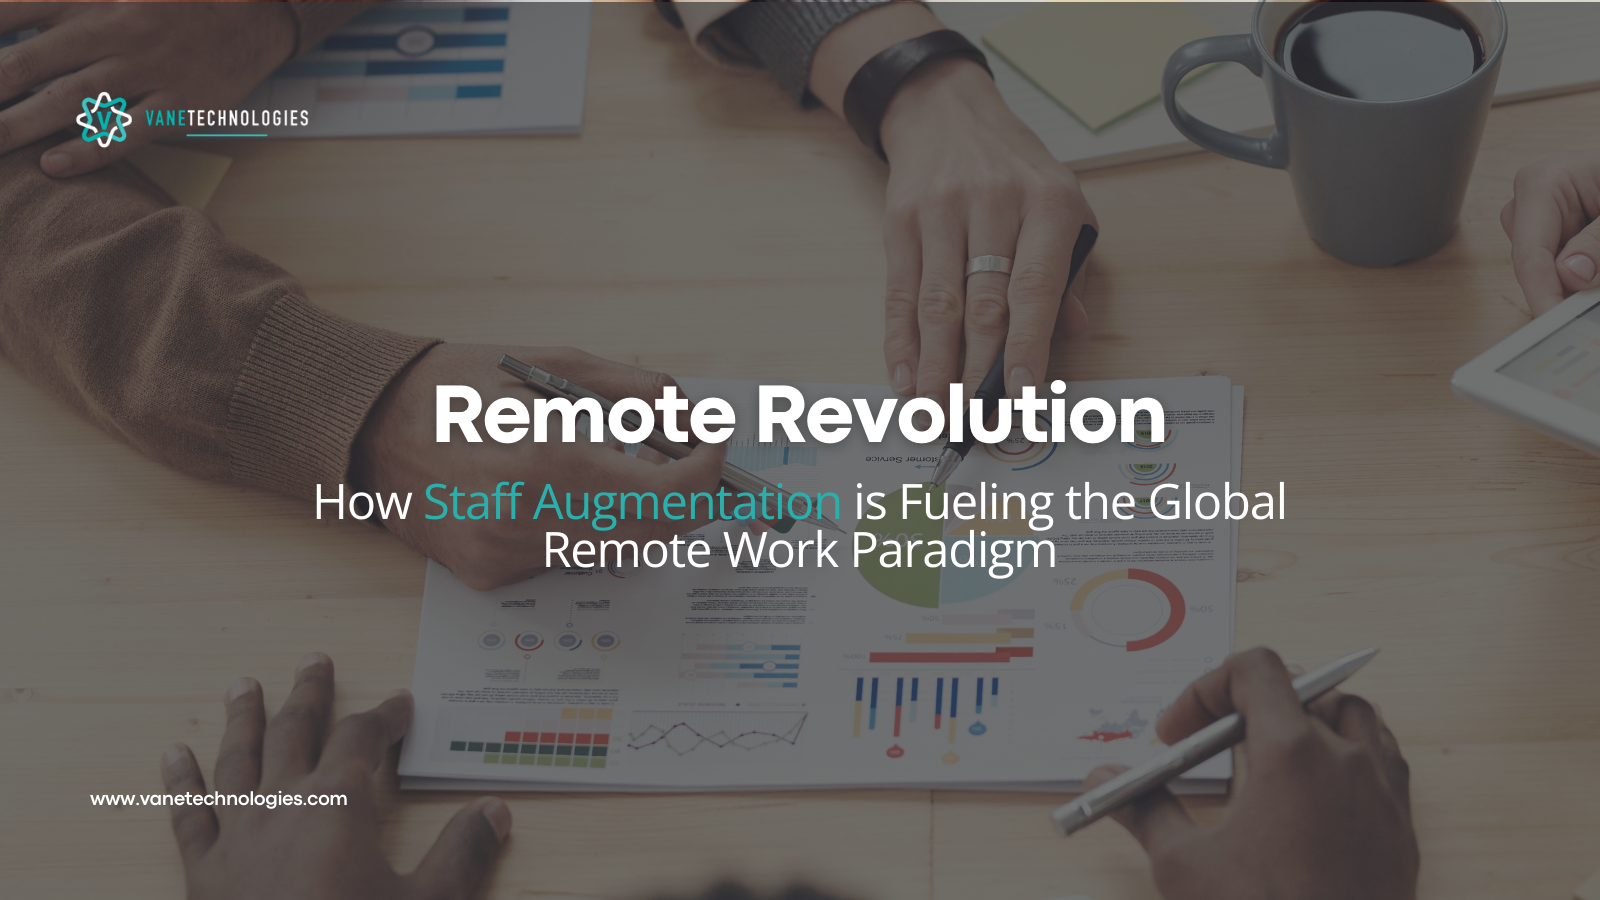 Remote Revolution: How Staff Augmentation is Fueling the Global Remote Work Paradigm